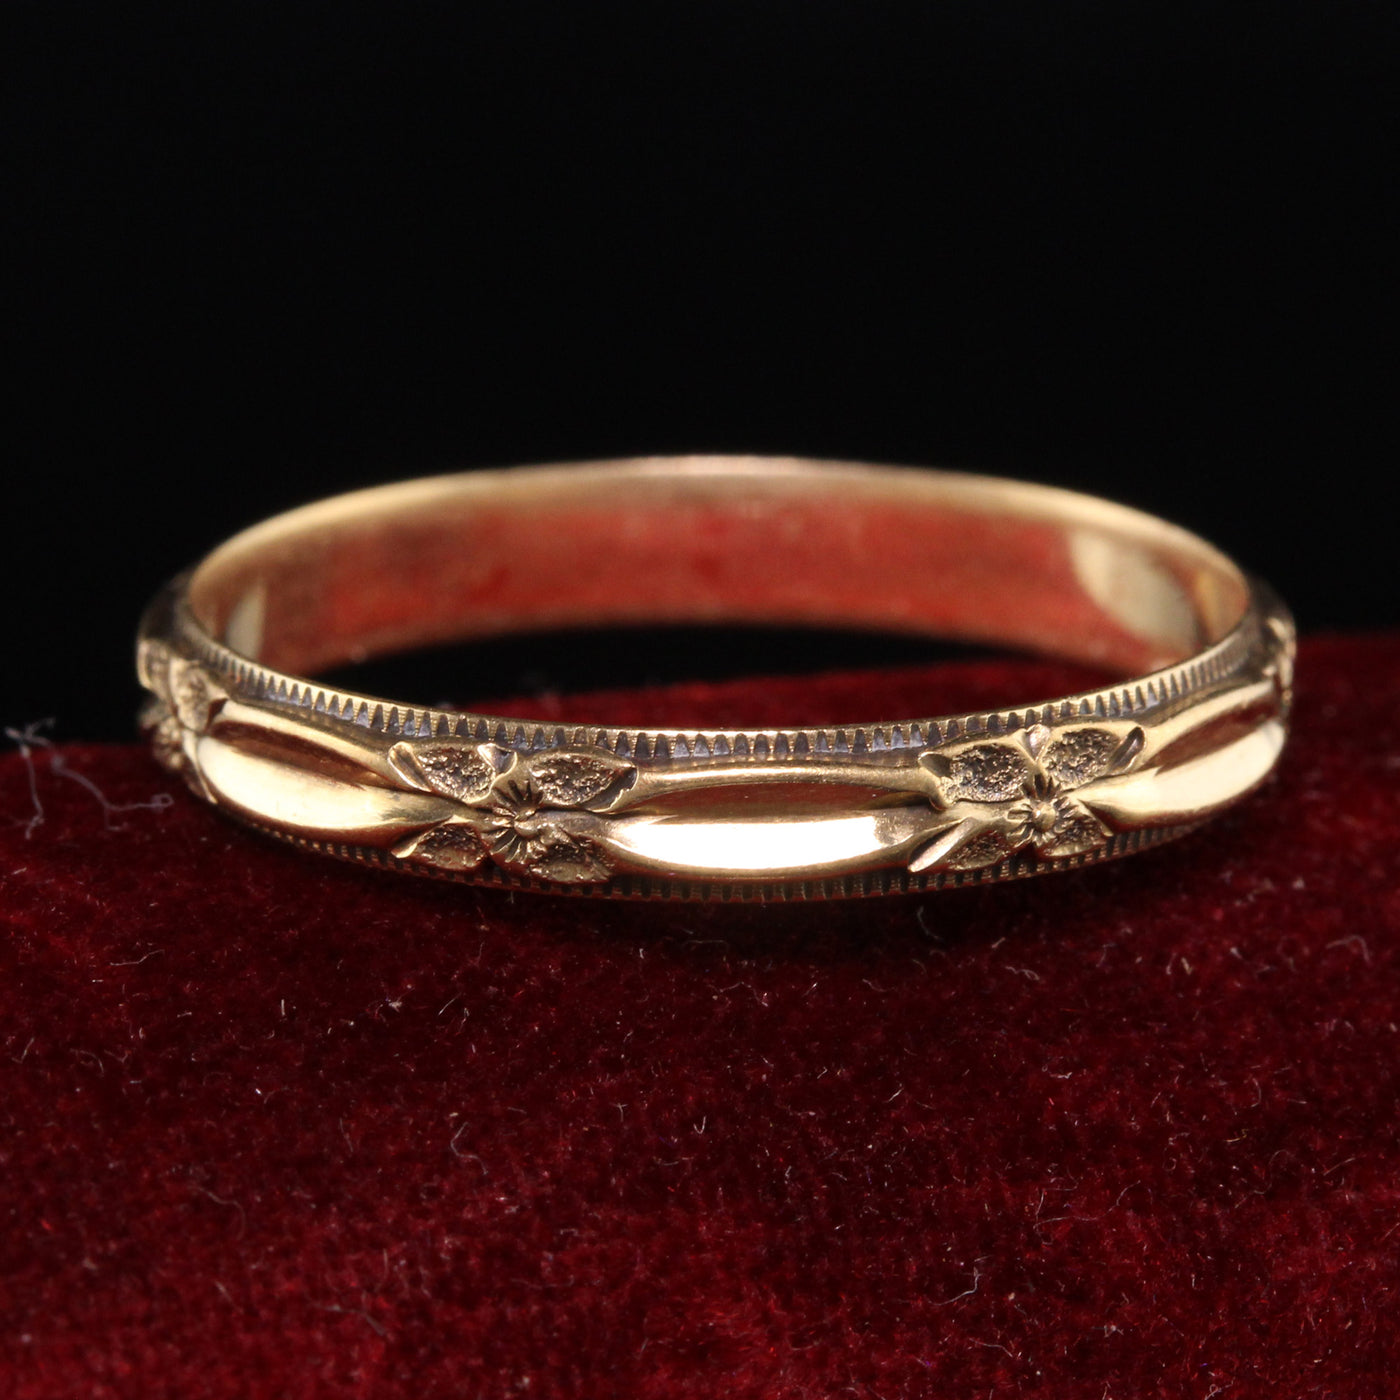 Antique Art Deco 14K Yellow Gold Engraved Wedding Band - Size 11